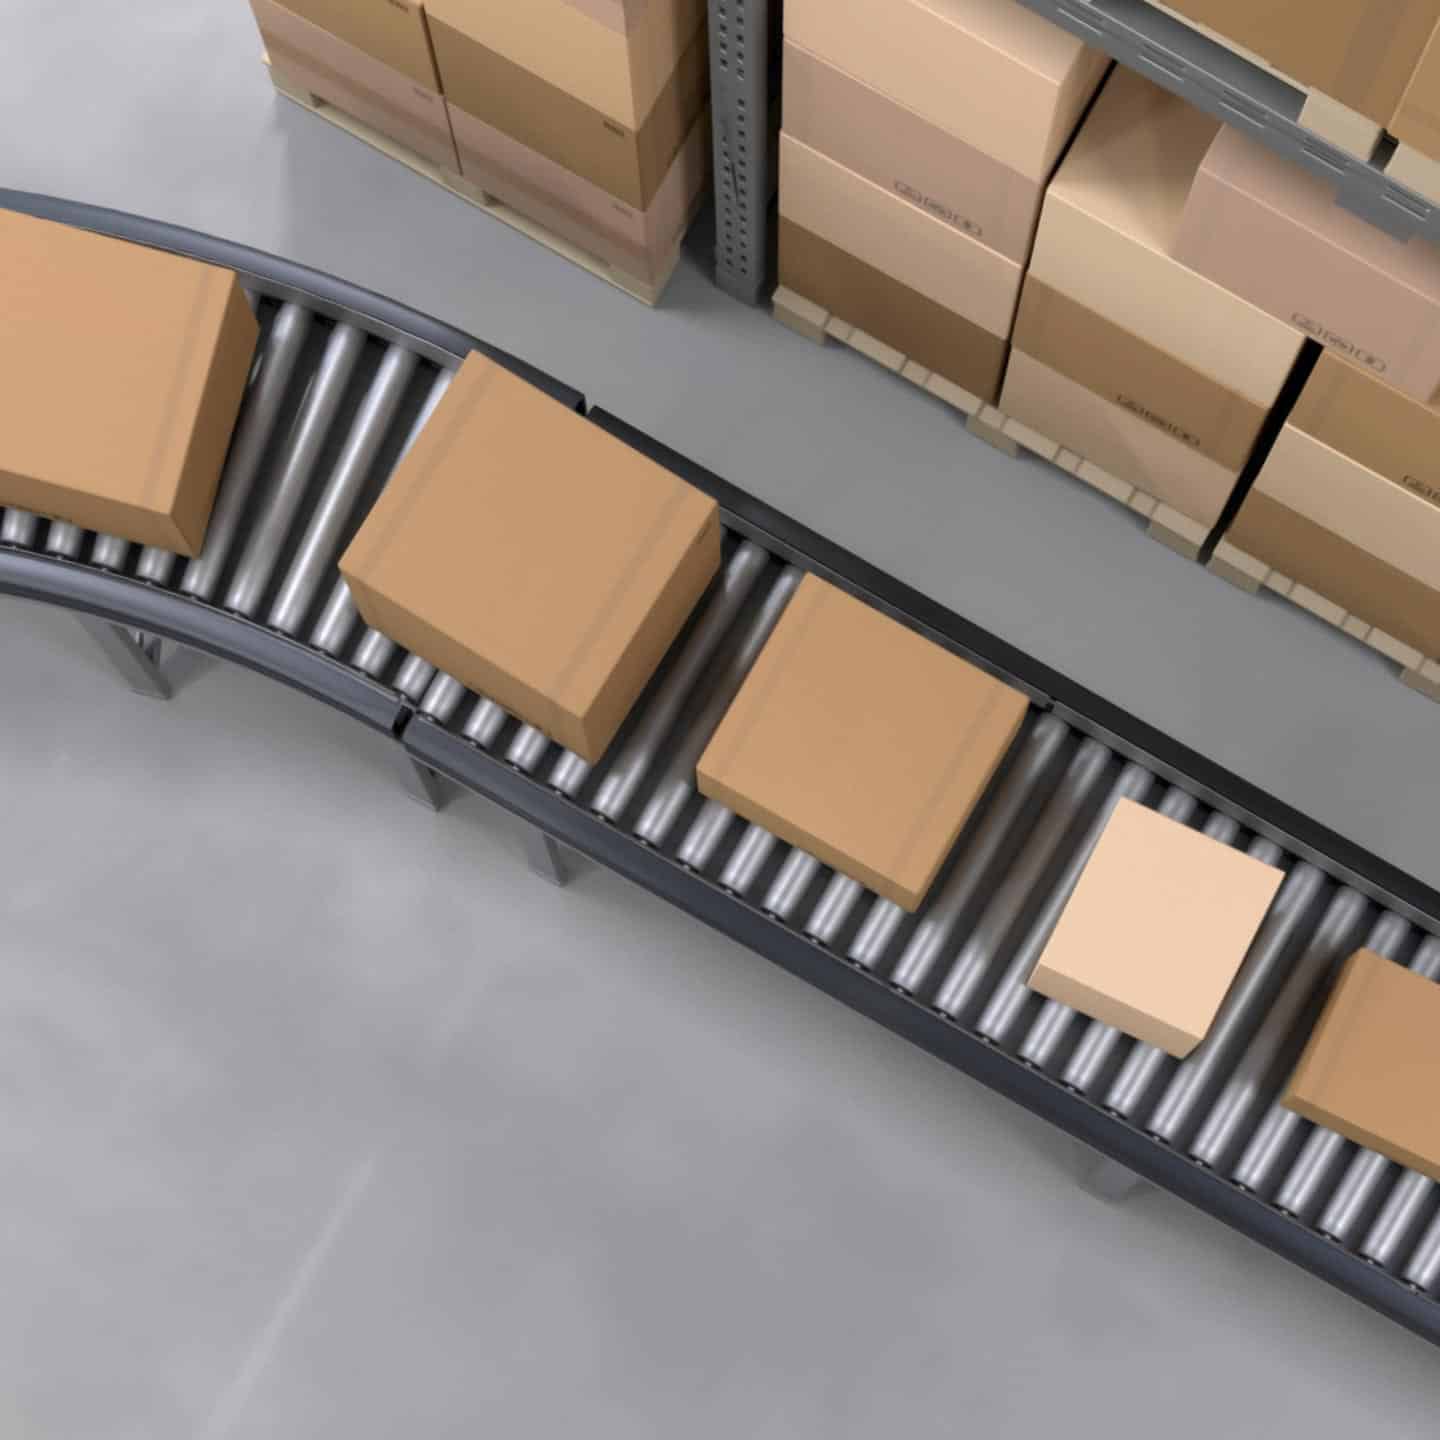 A conveyor belt with boxes of consumer packaged goods on it in a warehouse.